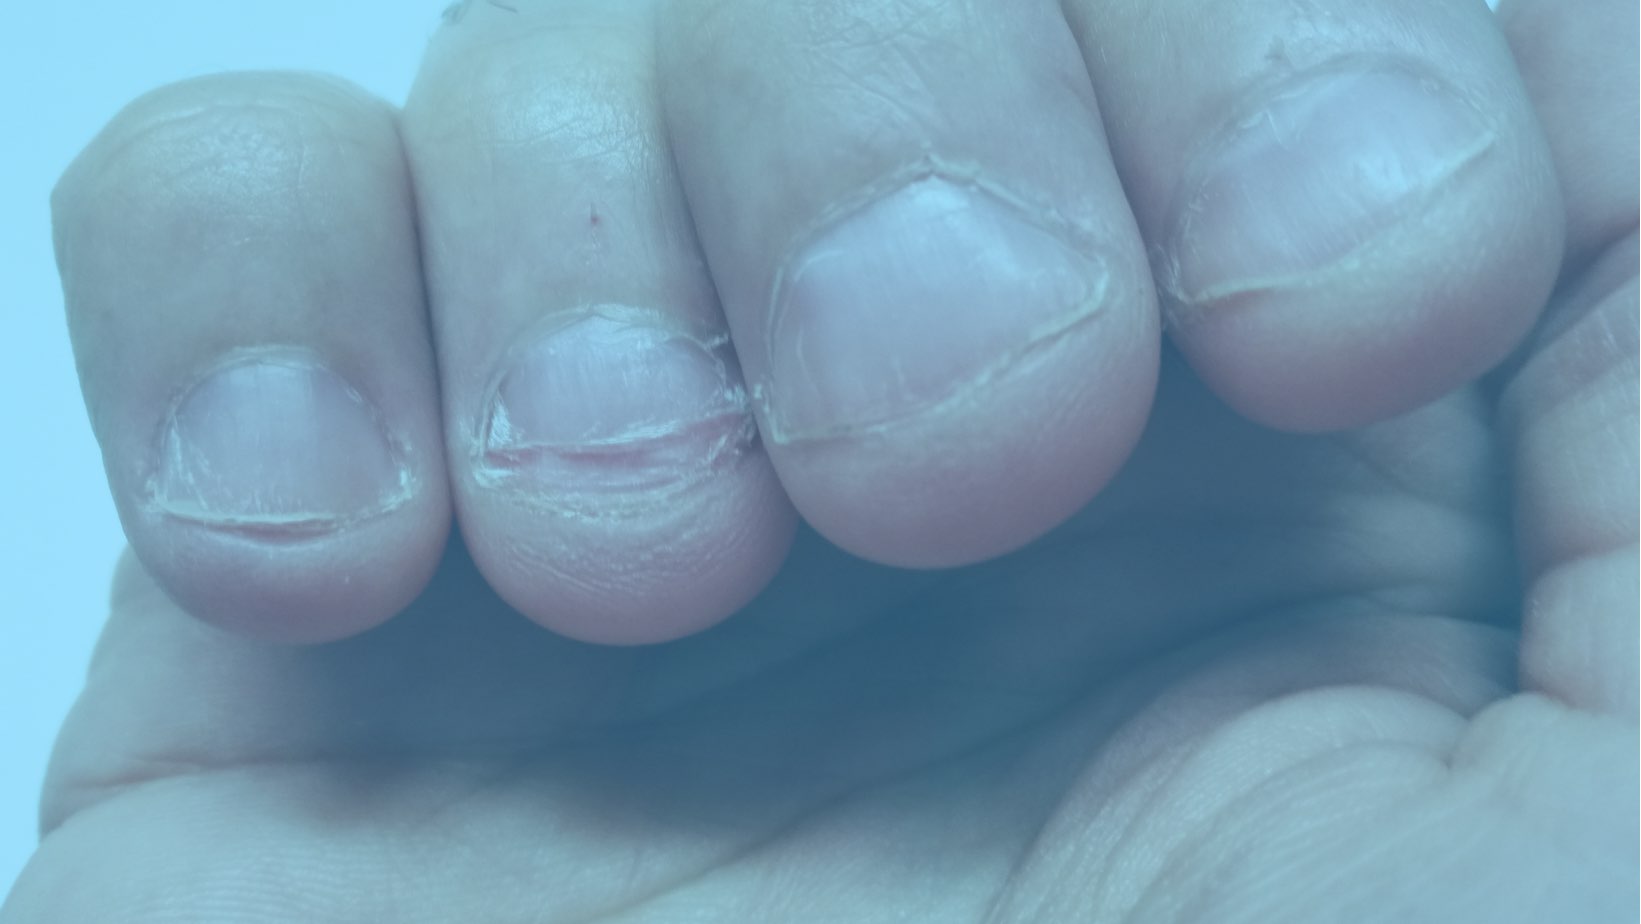 Woman Warns People Not To Bite Nails After Friend Gets Serious Infection